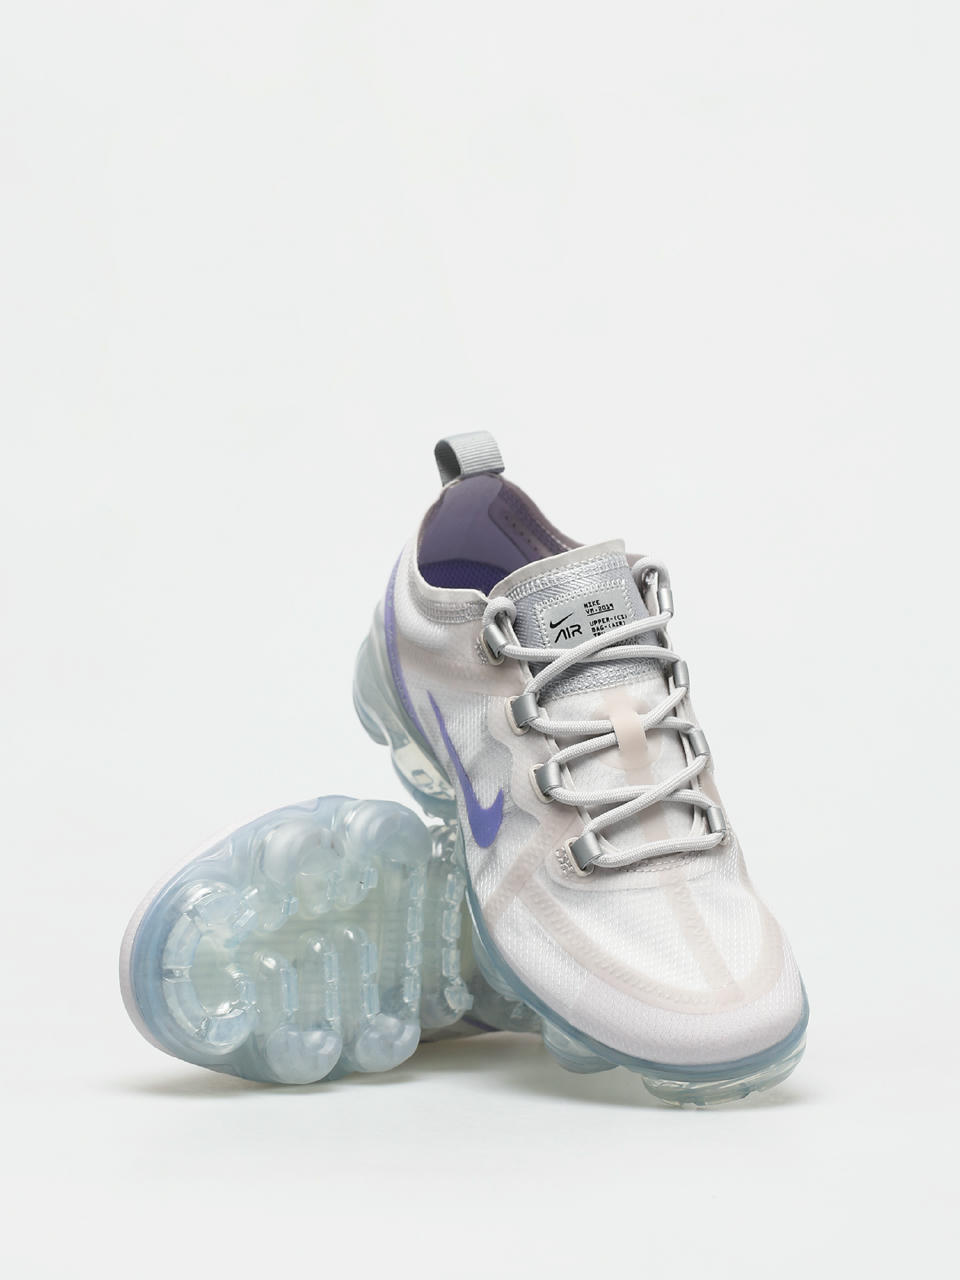 Andes peor infinito Nike Air Vapormax 2019 Se Shoes Wmn (vast grey/purple agate wolf grey)